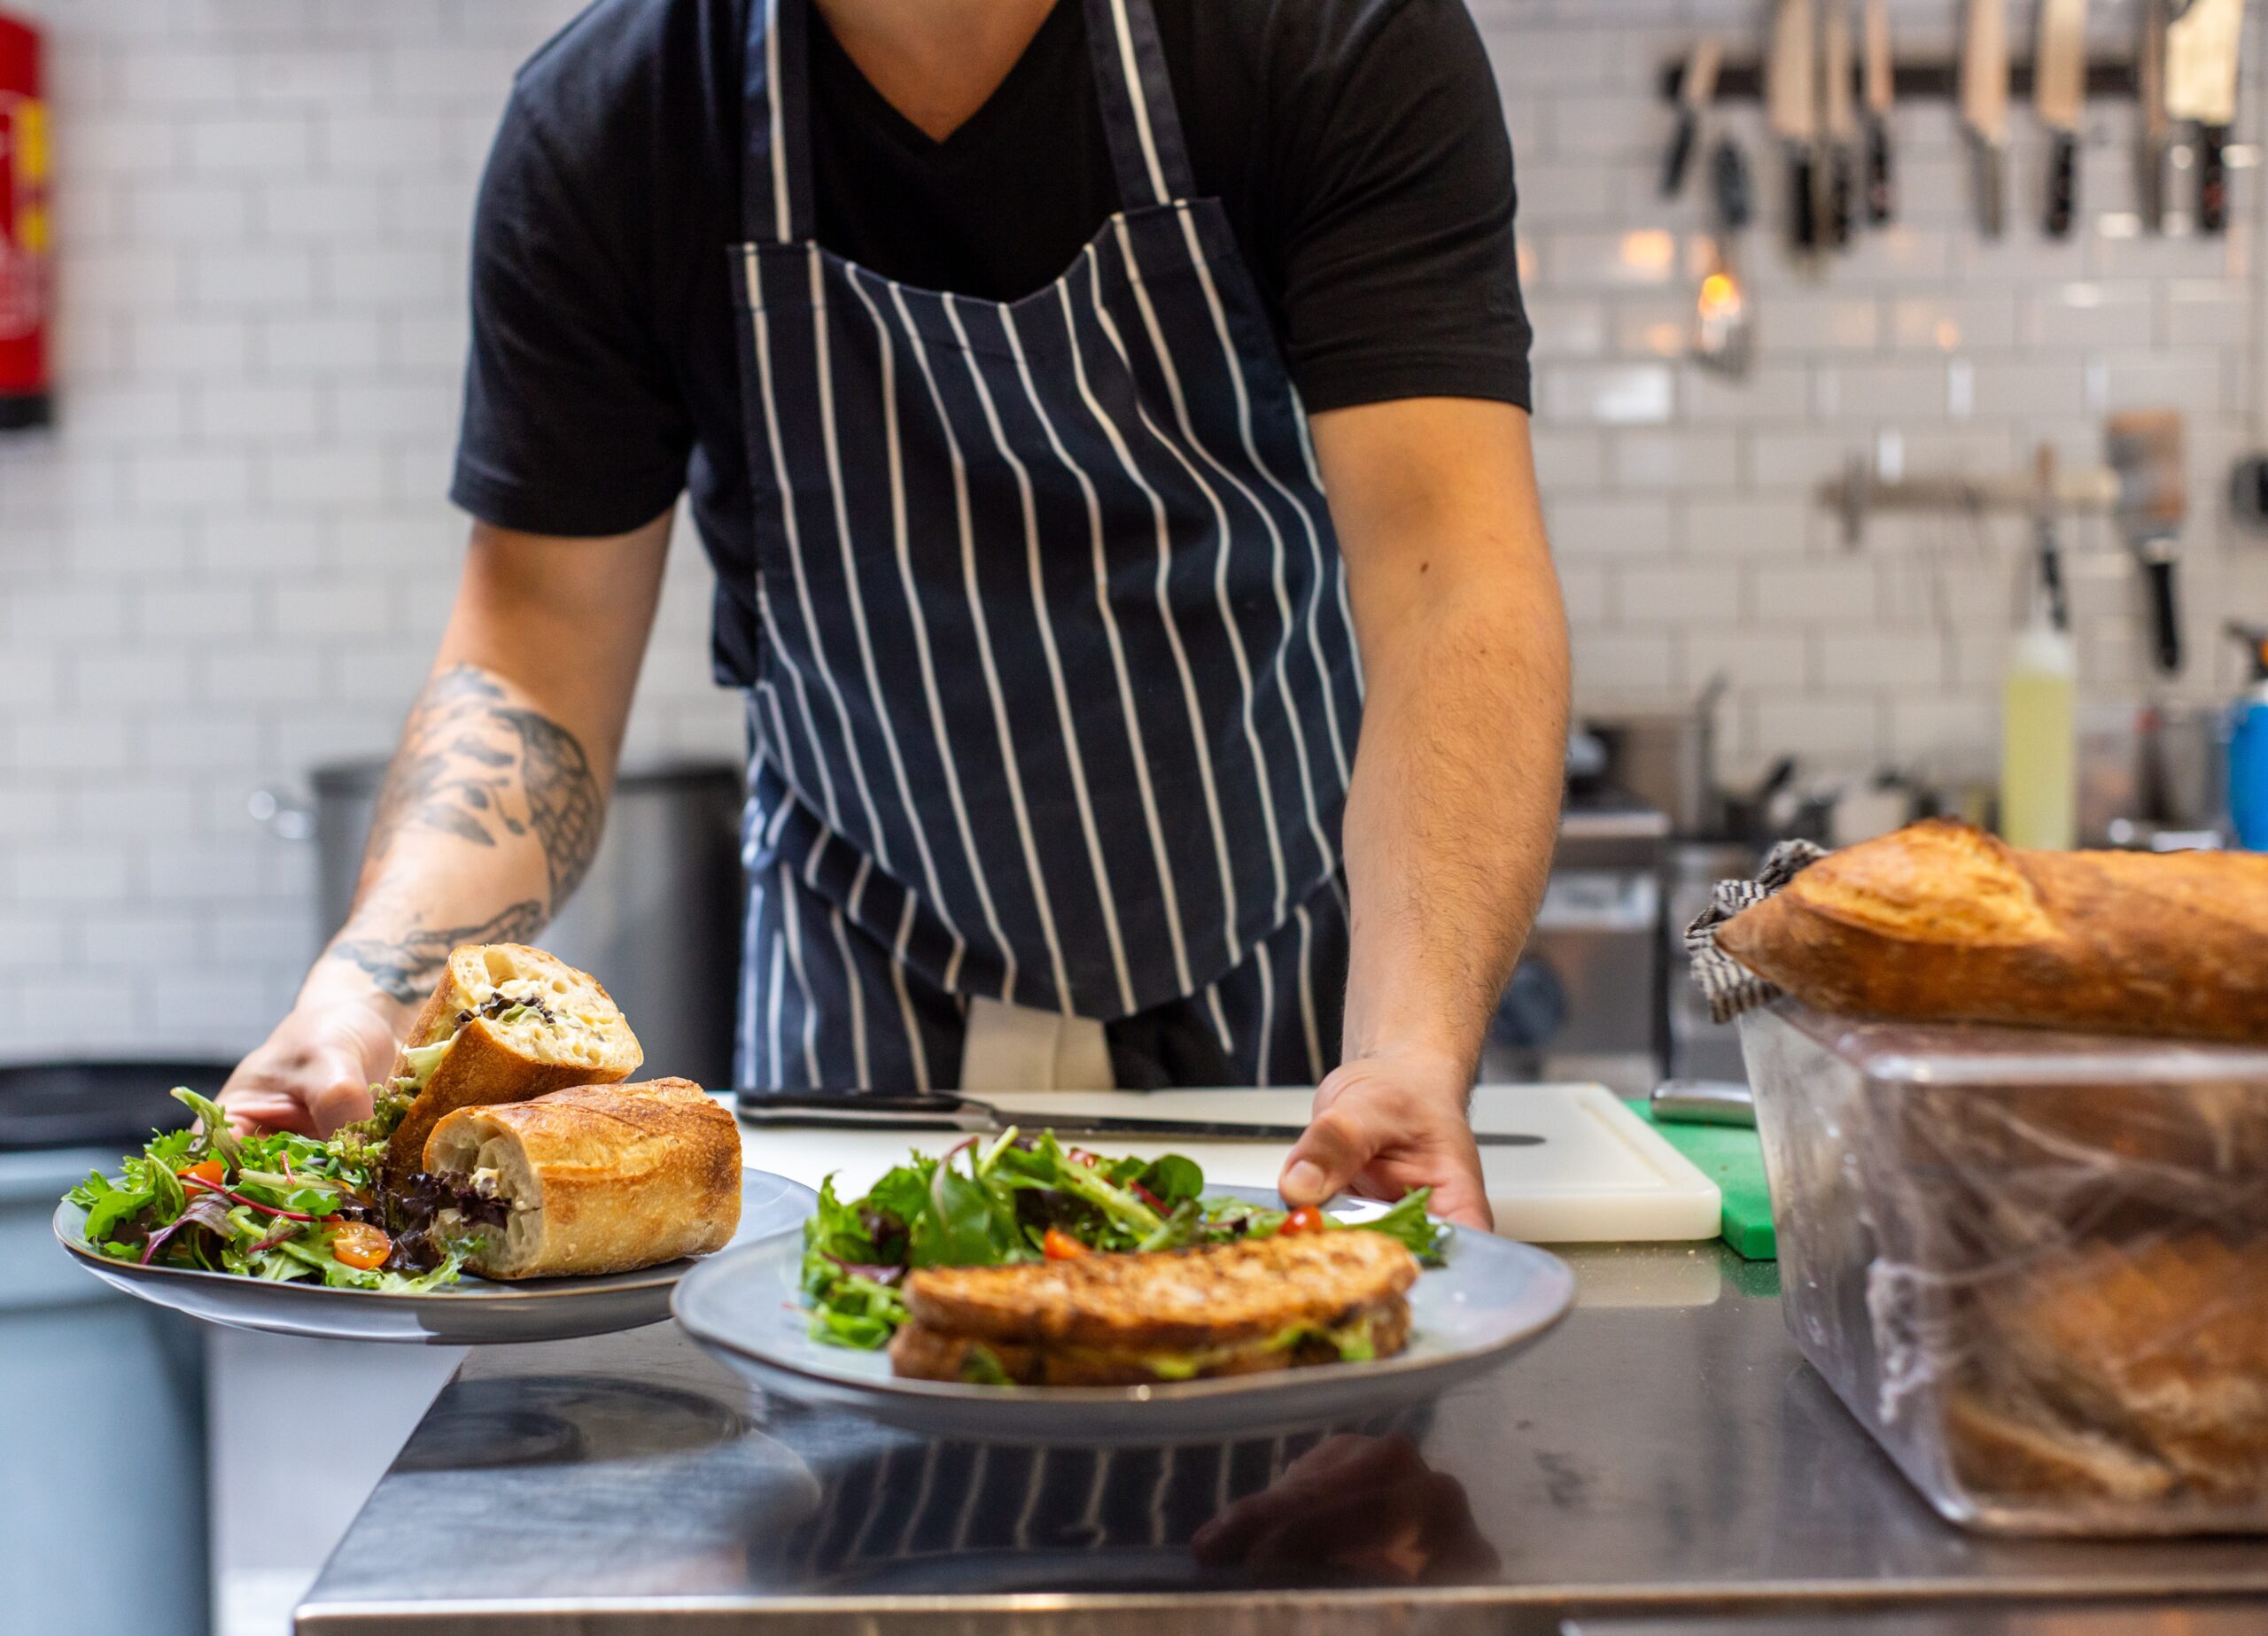 A chef in a striped apron serves plated sandwiches. Elevate your staff with custom uniforms from Stamford Uniform and Linen.